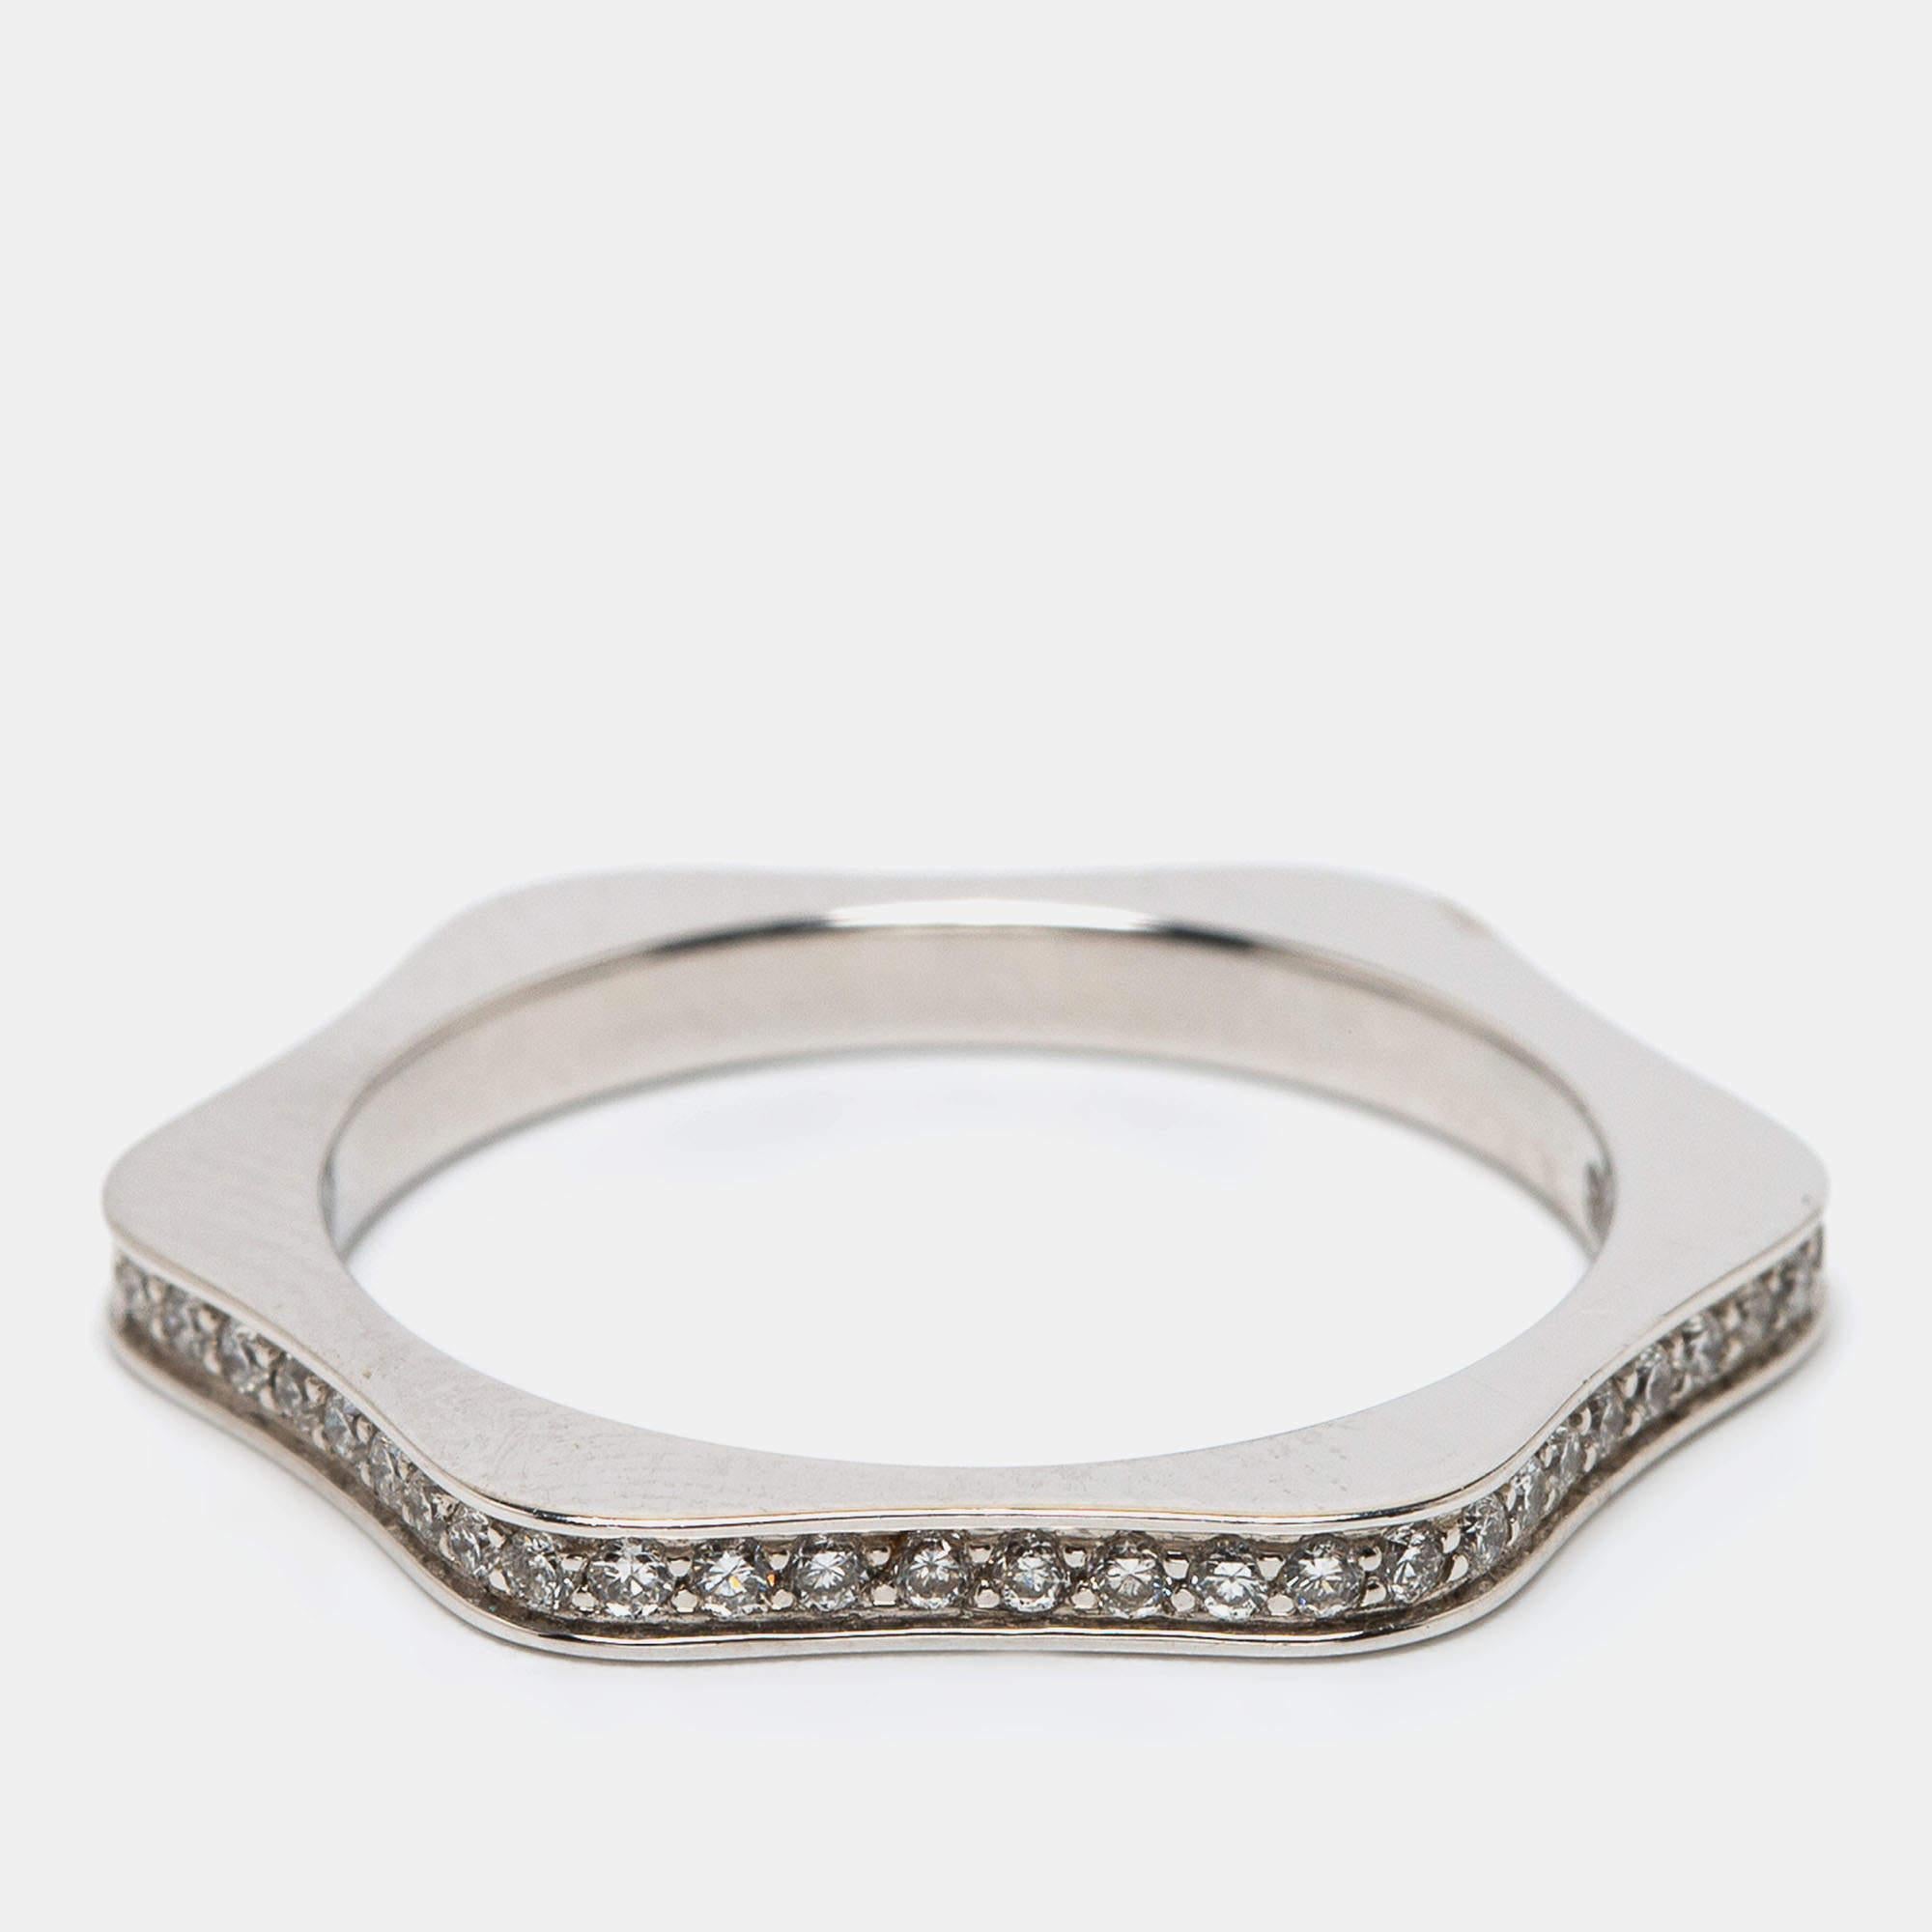 The fine workmanship, use of precious metals, and unique appeal make this fine jewelry ring a fabulous purchase. It's a worthy investment.

Includes: Original Box, Original Case, Original Pouch

